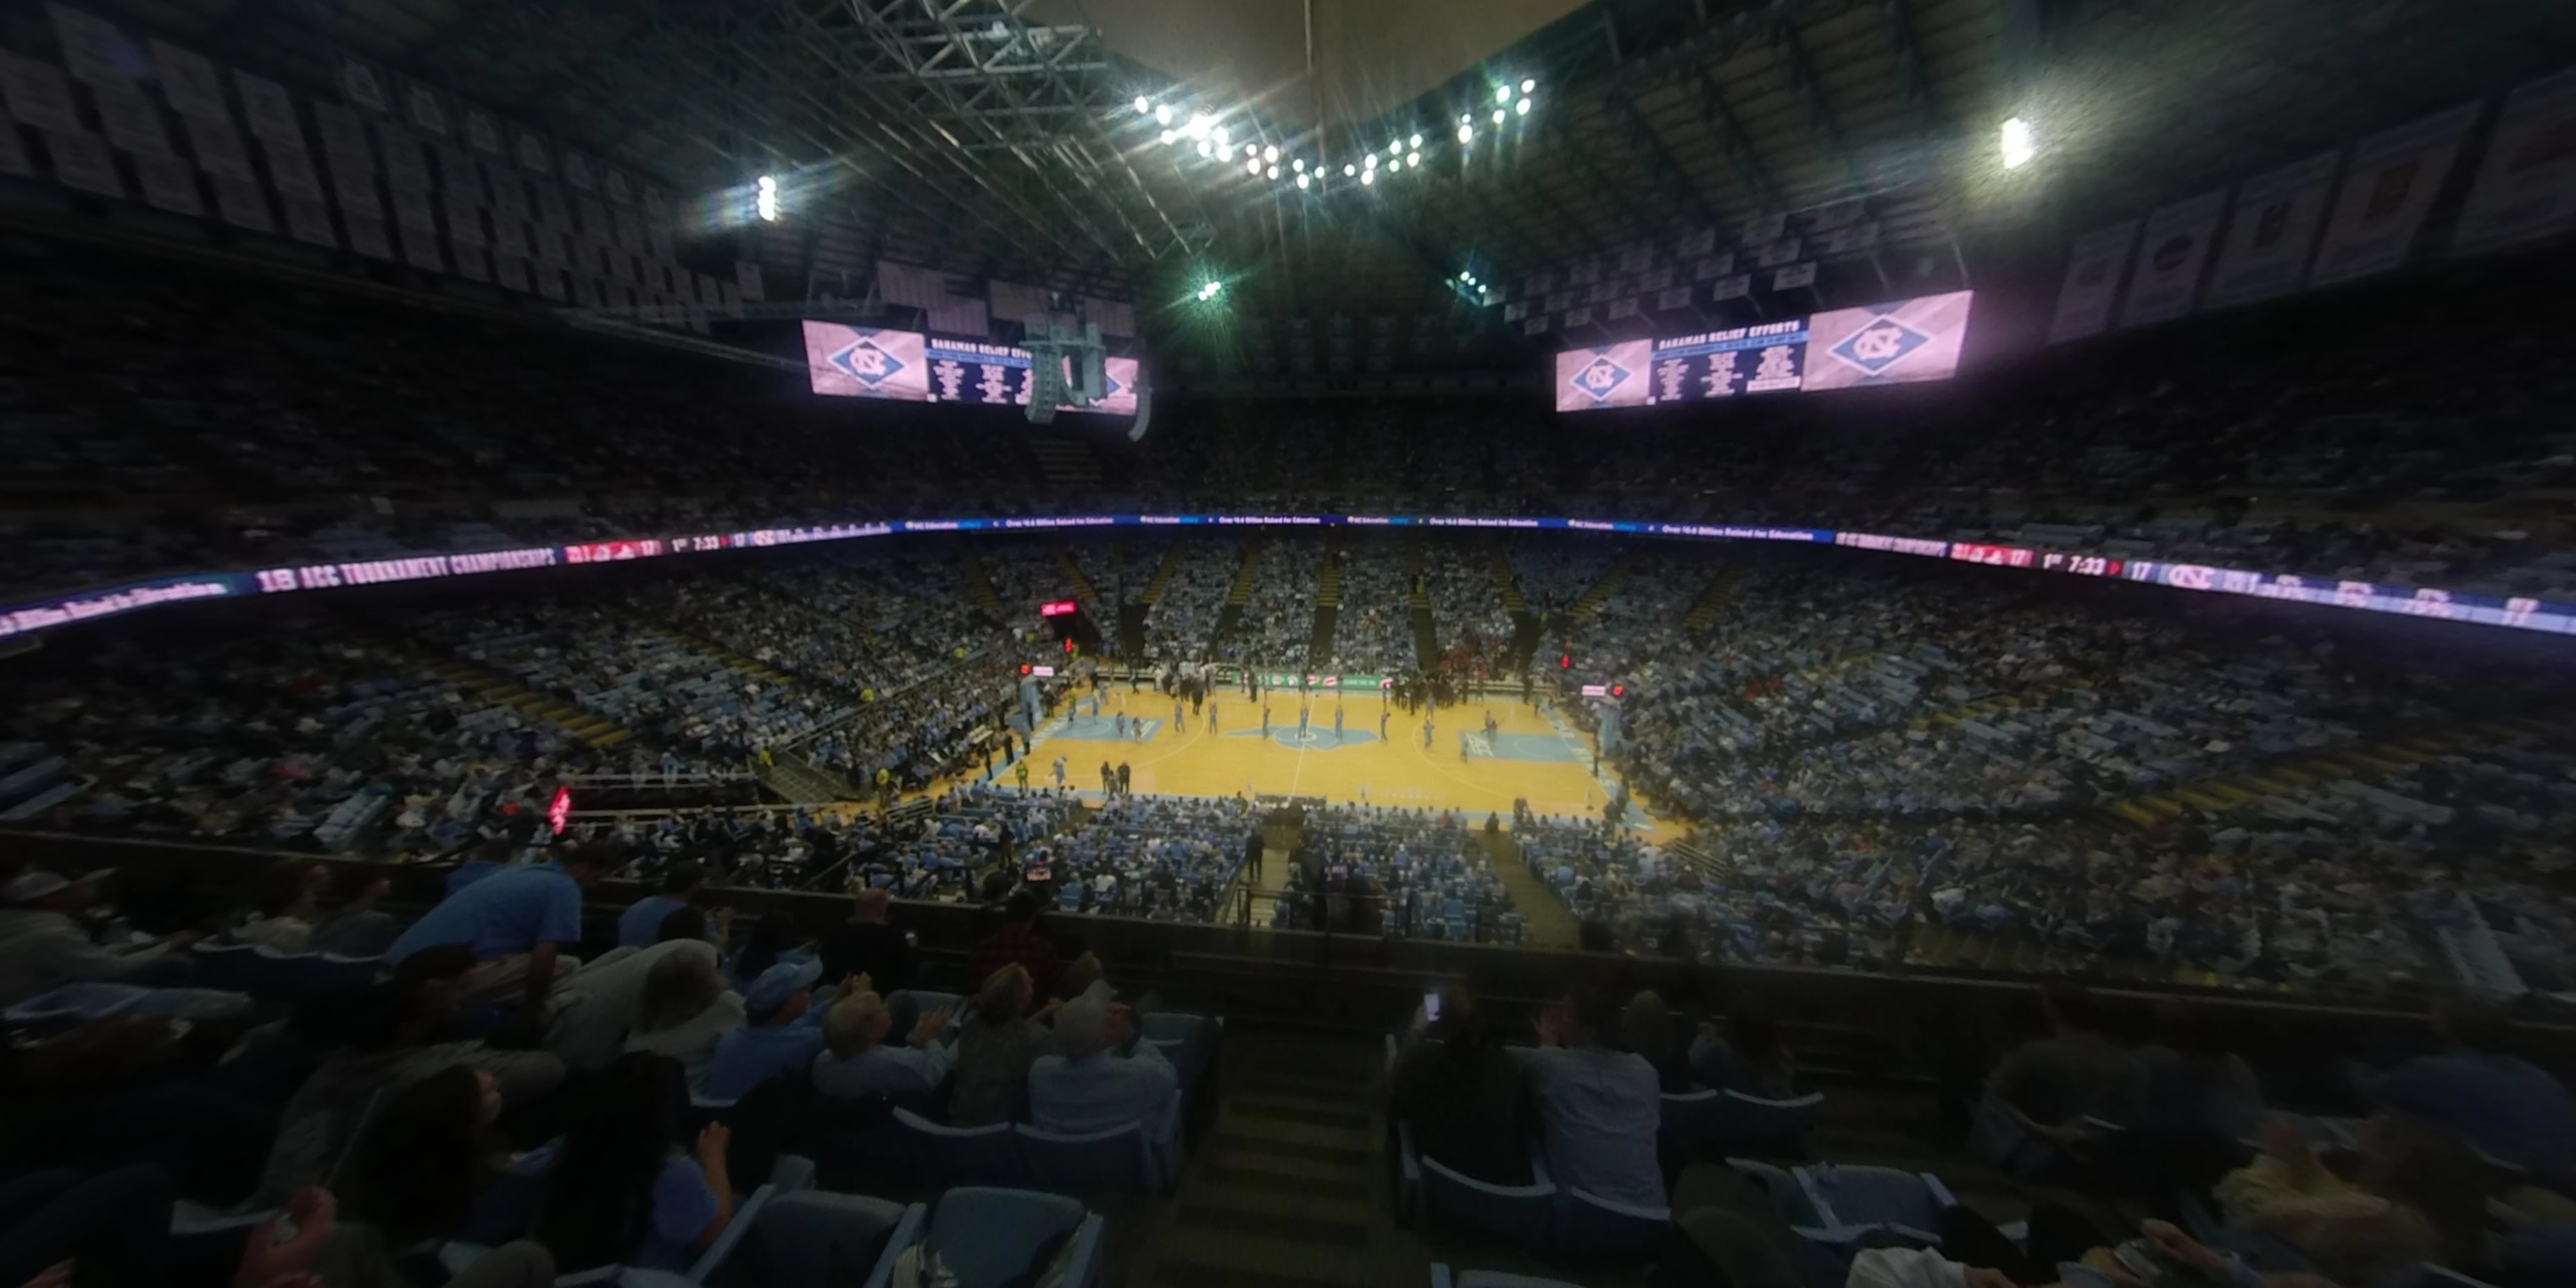 section 225 panoramic seat view  - dean smith center